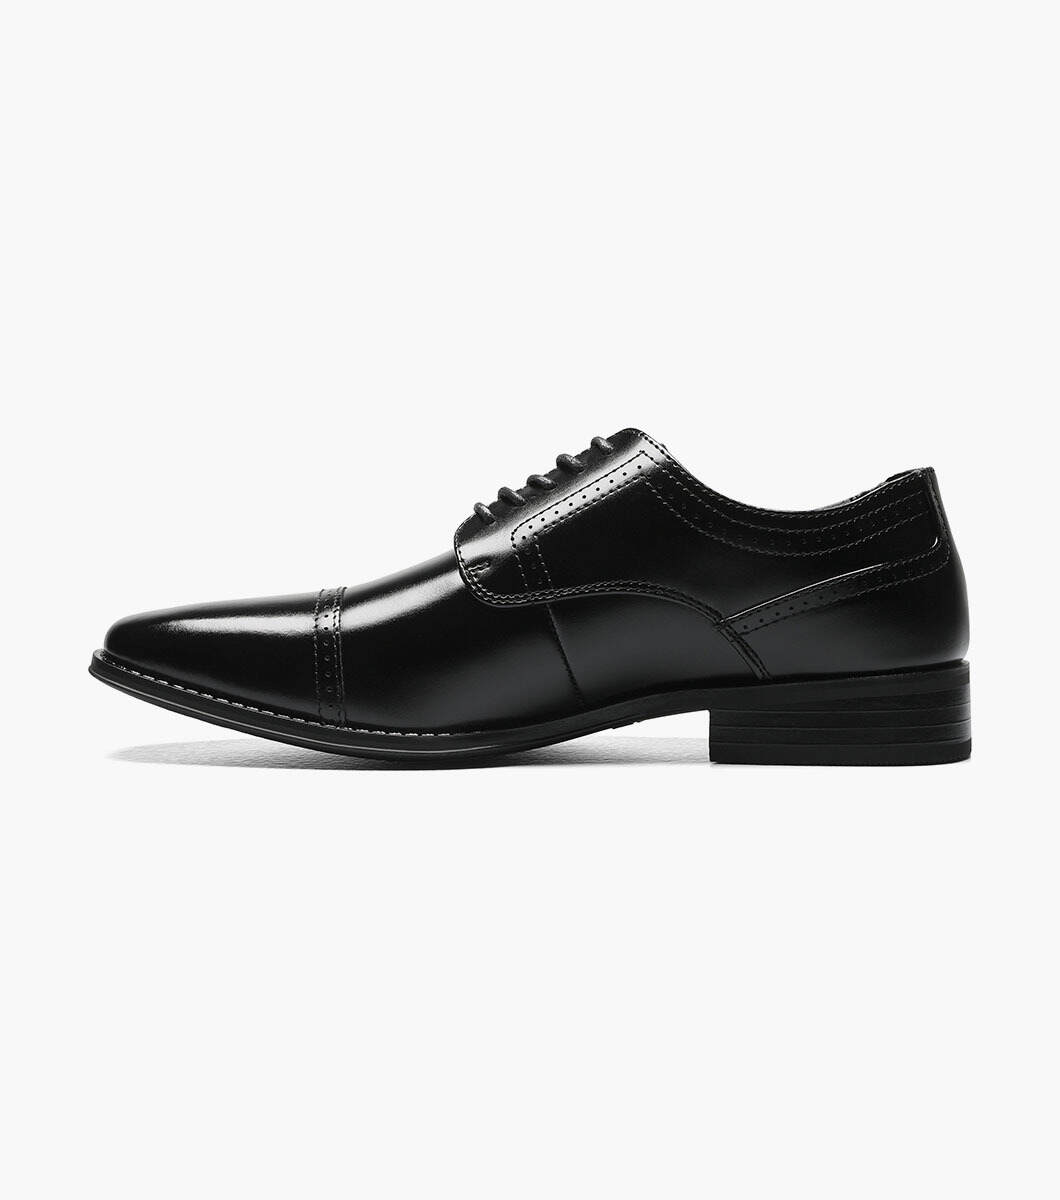 Amali Men's Smooth Modified Cap Toe Oxford w/ Braided Details Bevel-065 